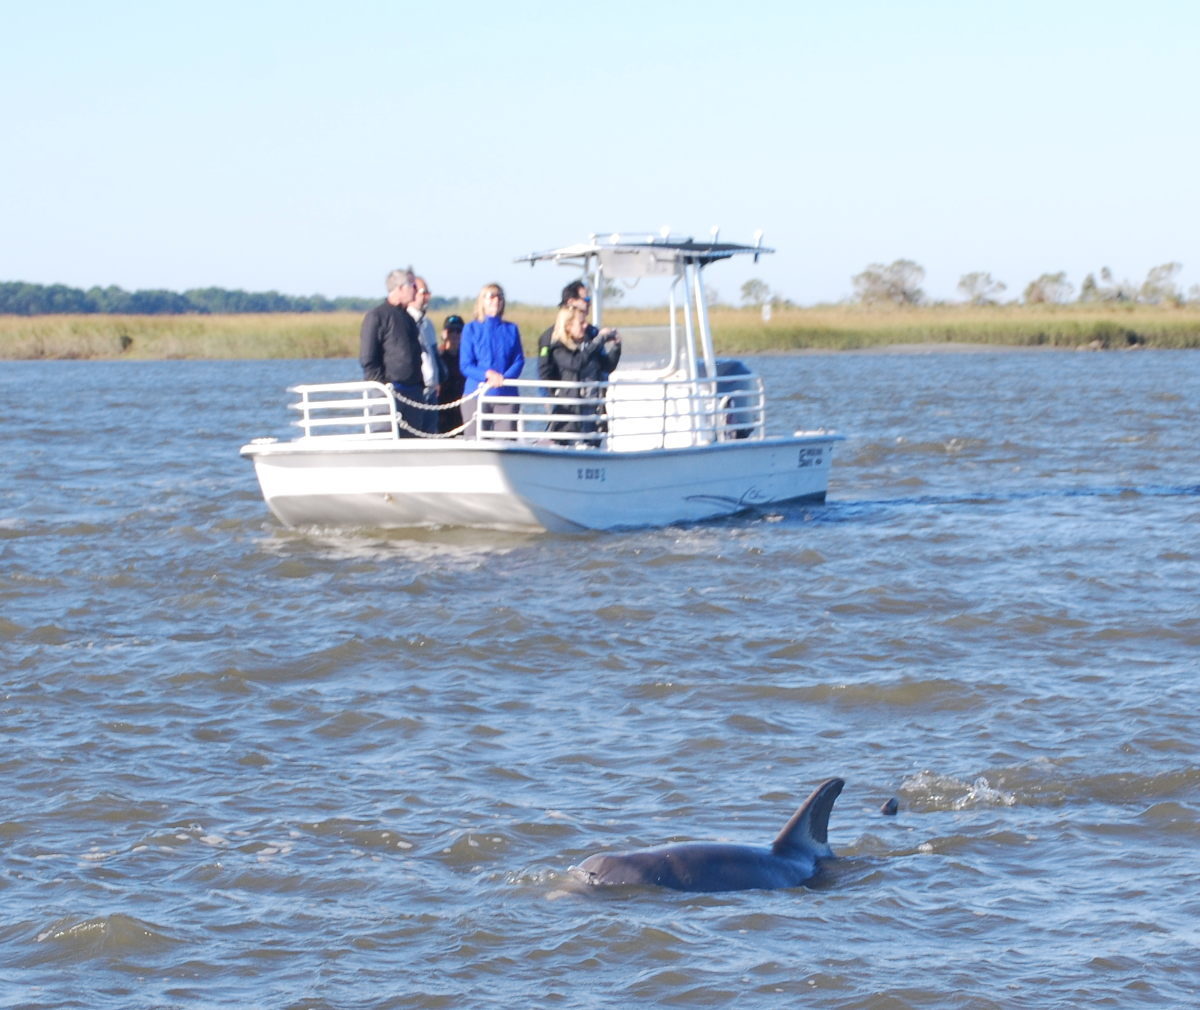 Dolphin in the foreground with a boat full of people in the background